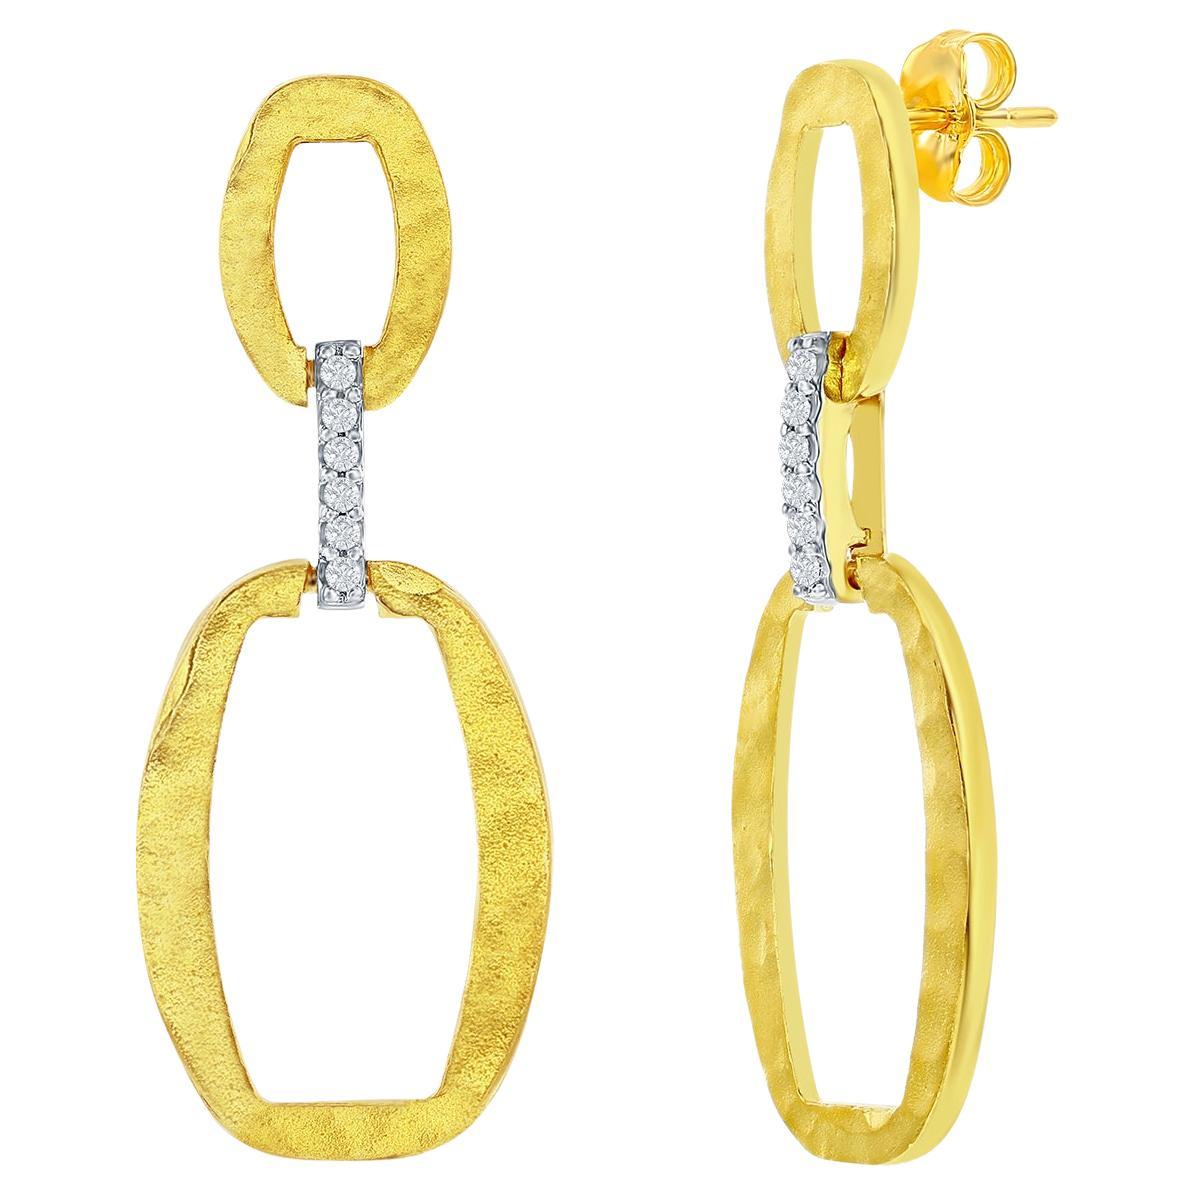 Hand-Crafted 14K Yellow Gold Dangling Open Ellipse Link Earrings For Sale